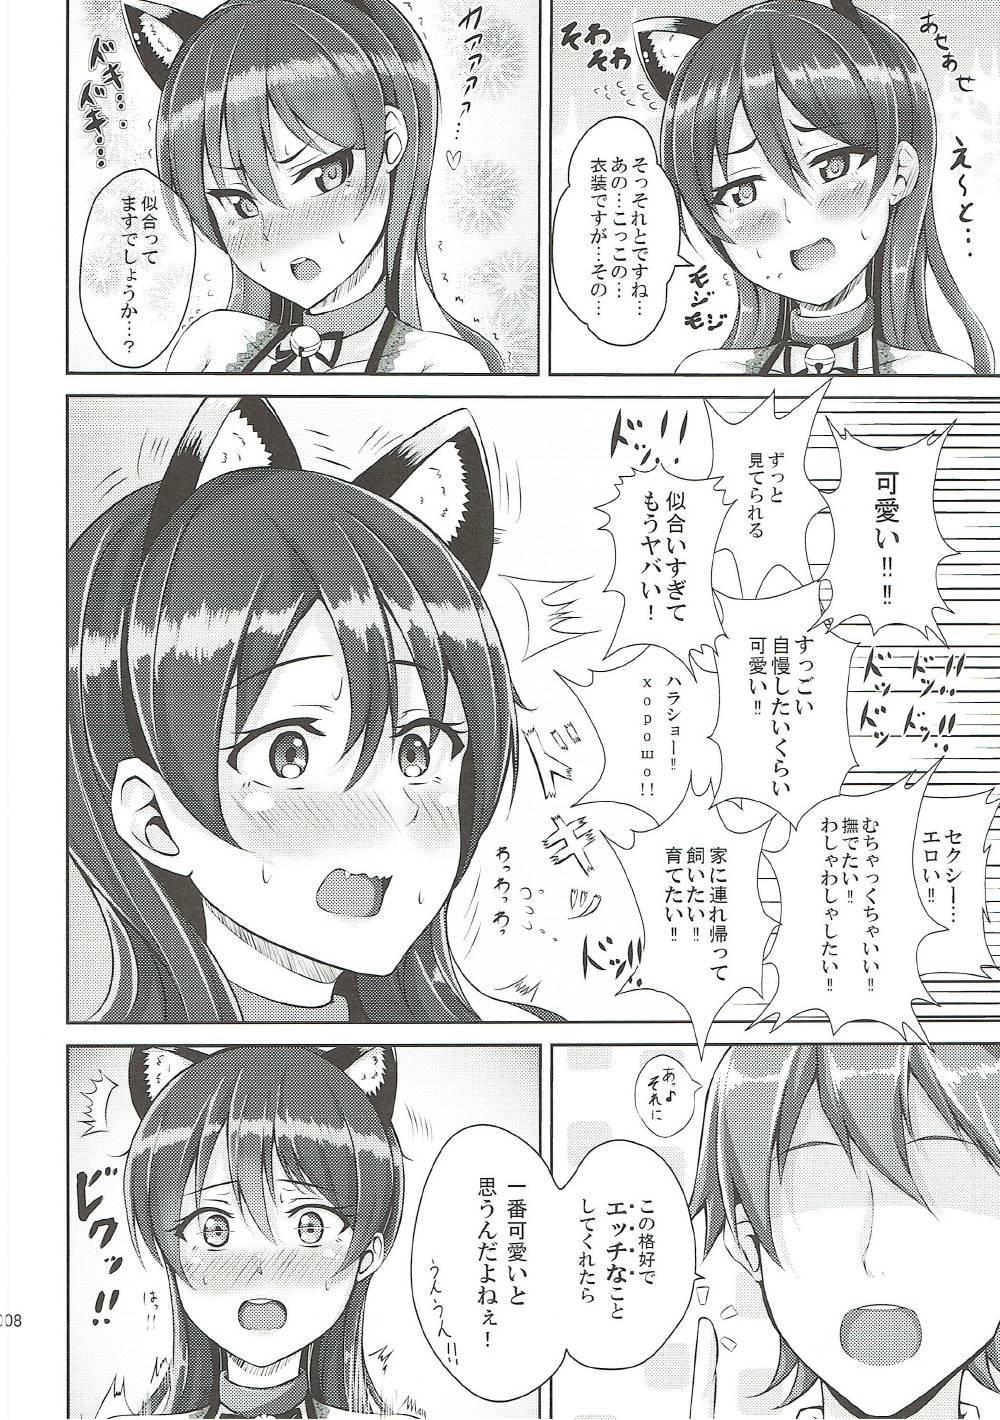 The Umi-chan to Nyannyan - Love live Gay Massage - Page 6